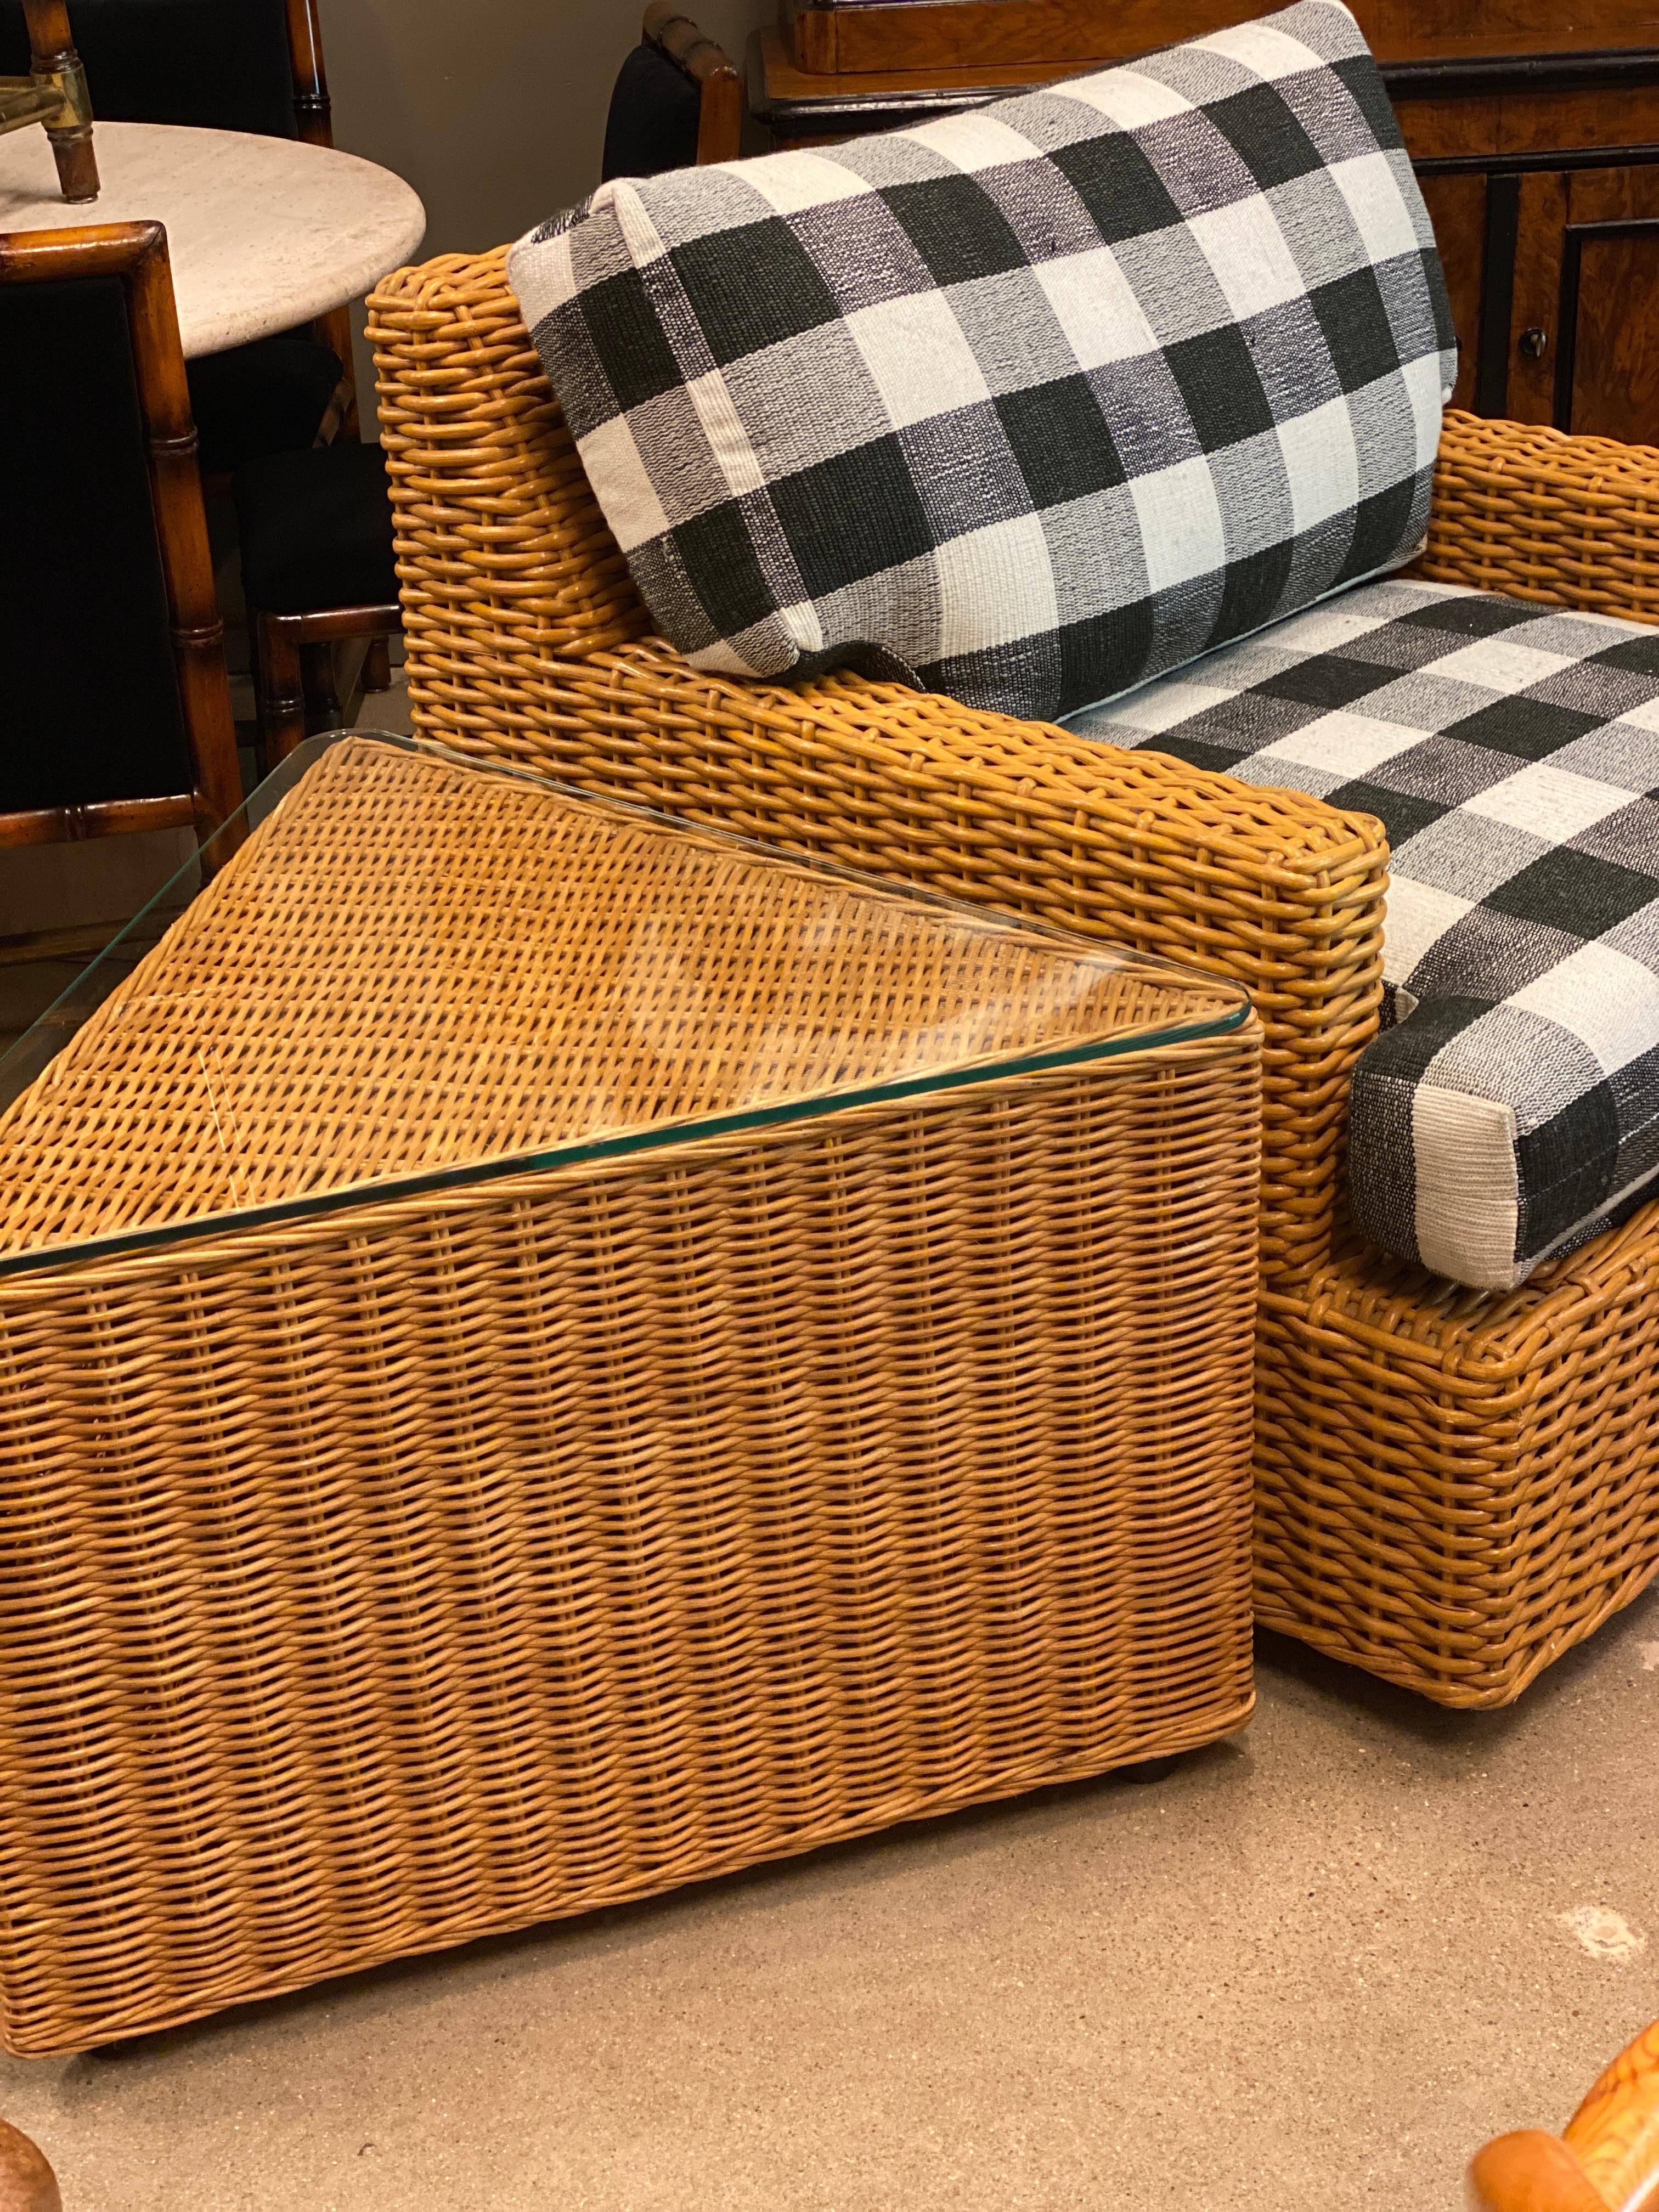 Woven Vintage Wicker Side Tables, Triangle Shape, Sold Separately